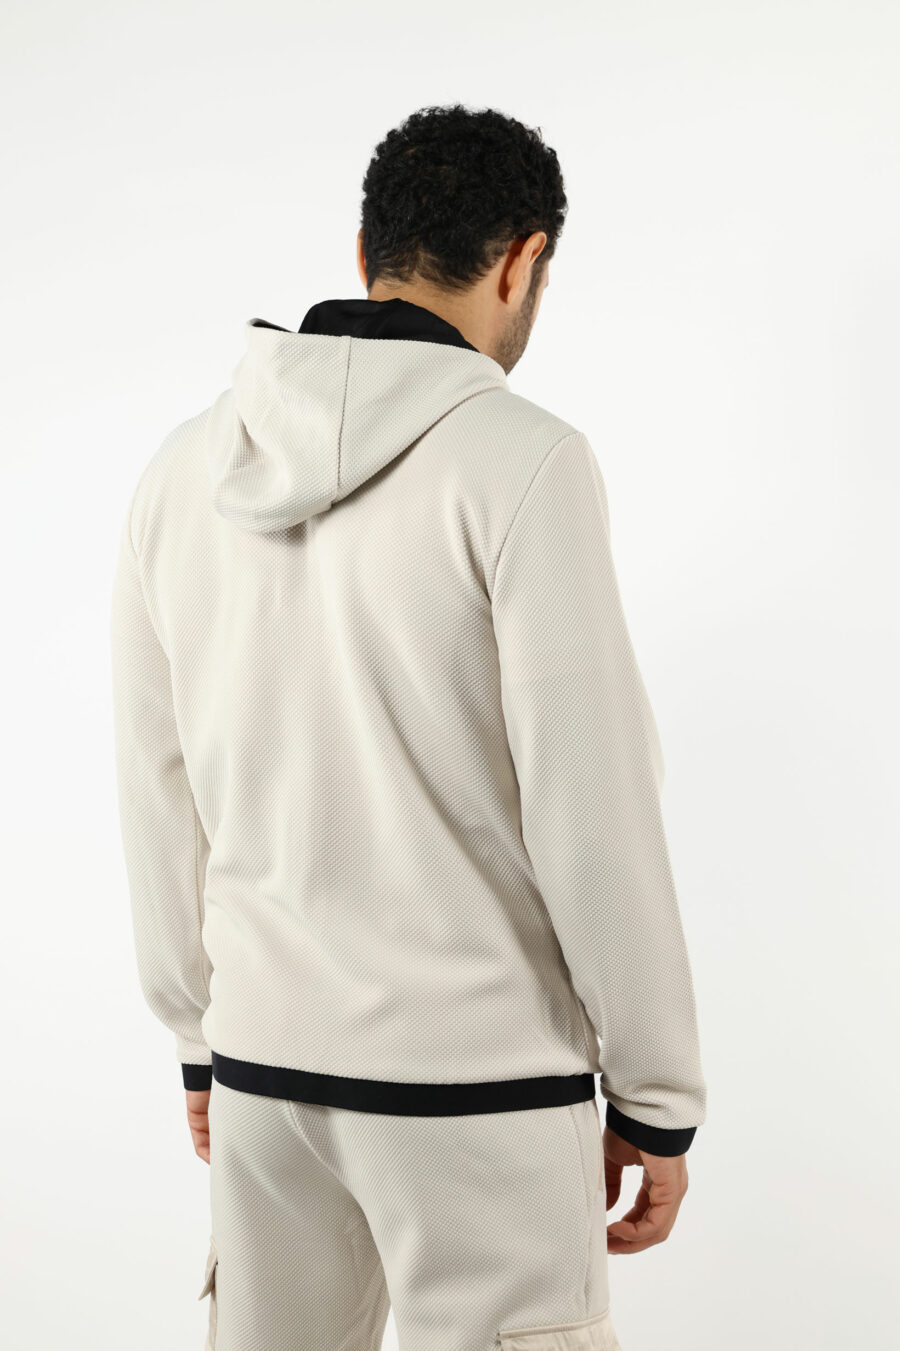 Beige hooded sweatshirt with black details and minilogue "lux identity" - 110914